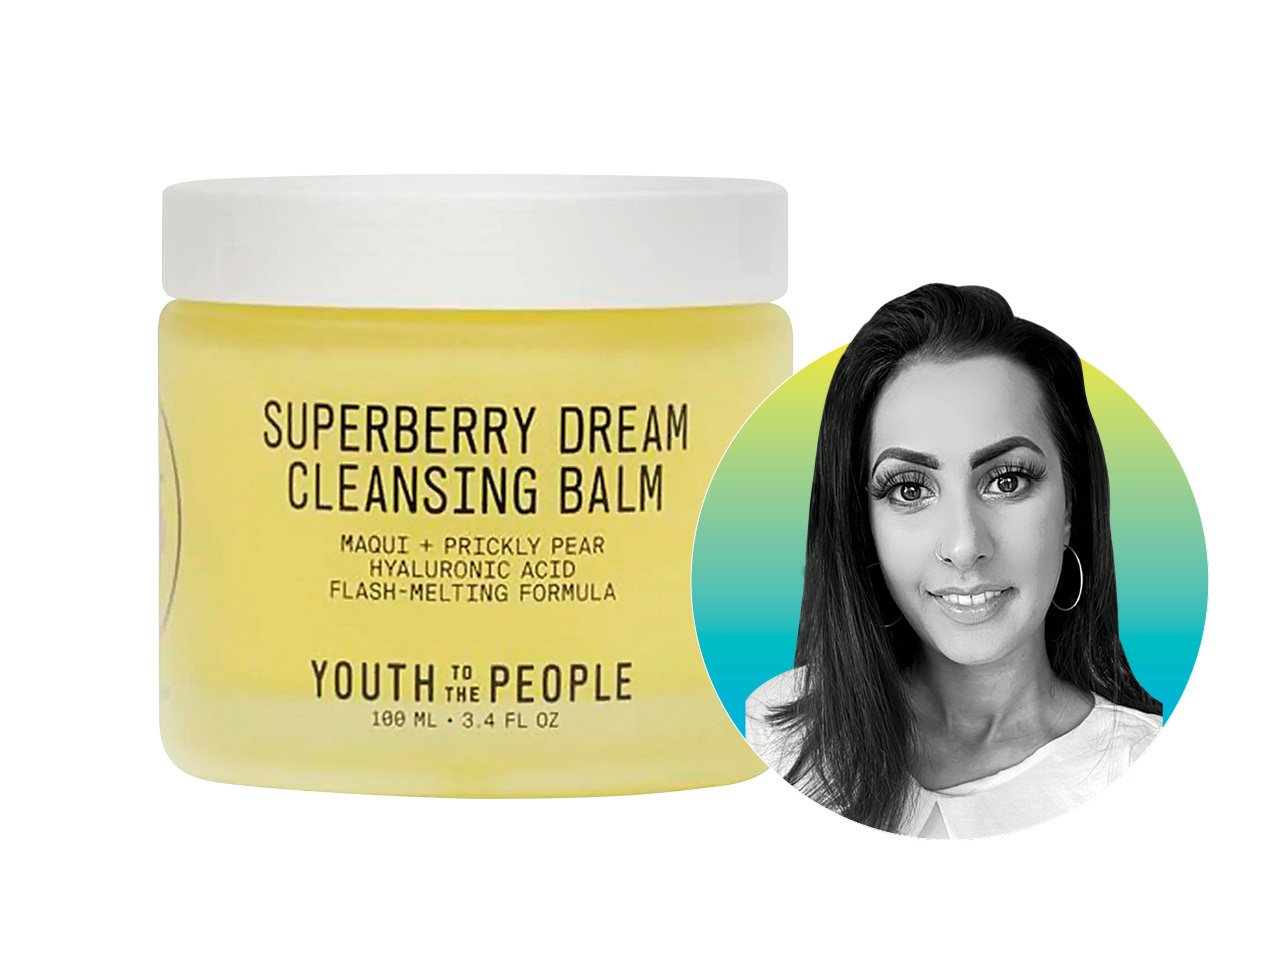 A Chatelaine reader reviews the Youth to the People Superberry Cleansing Balm.